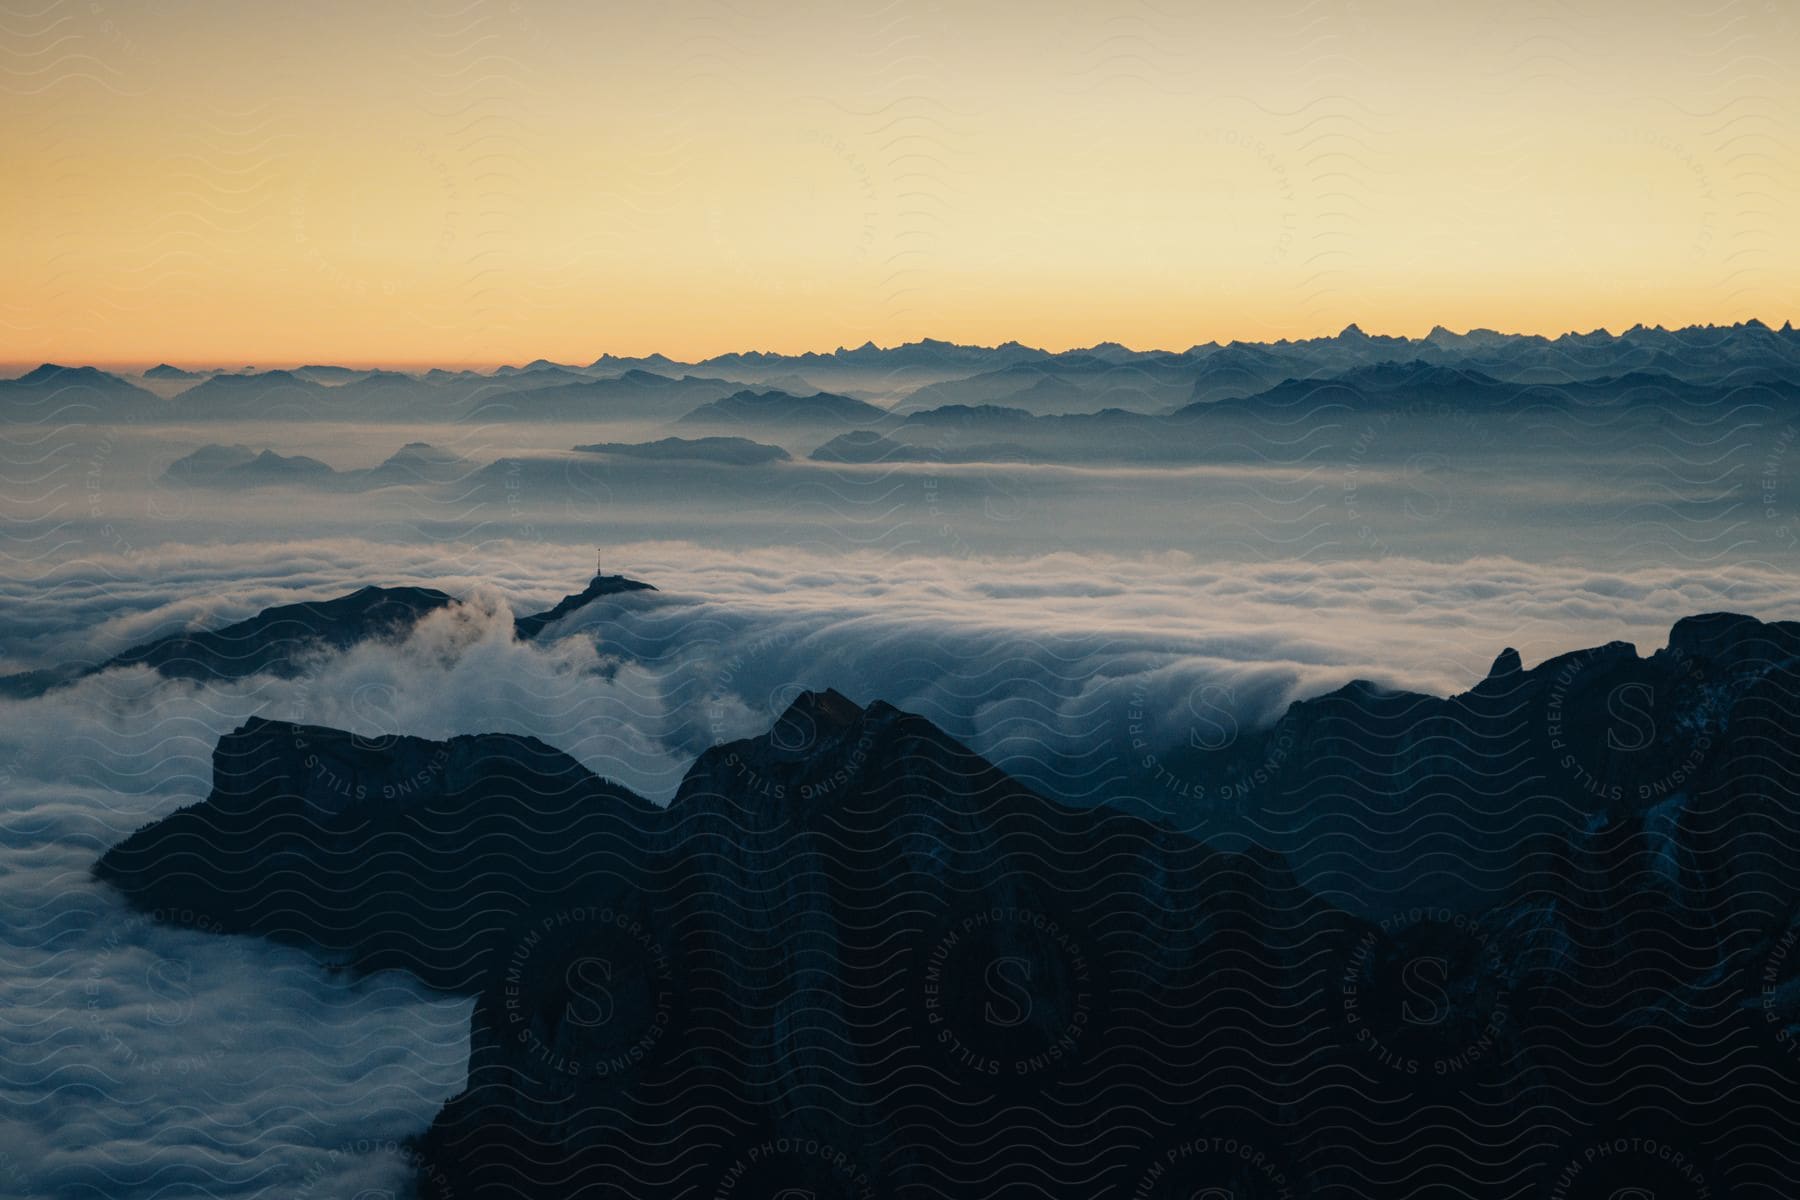 A landscape from the top of a mountain of stones where it shows a horizon full of mountains and clouds in a sunset.